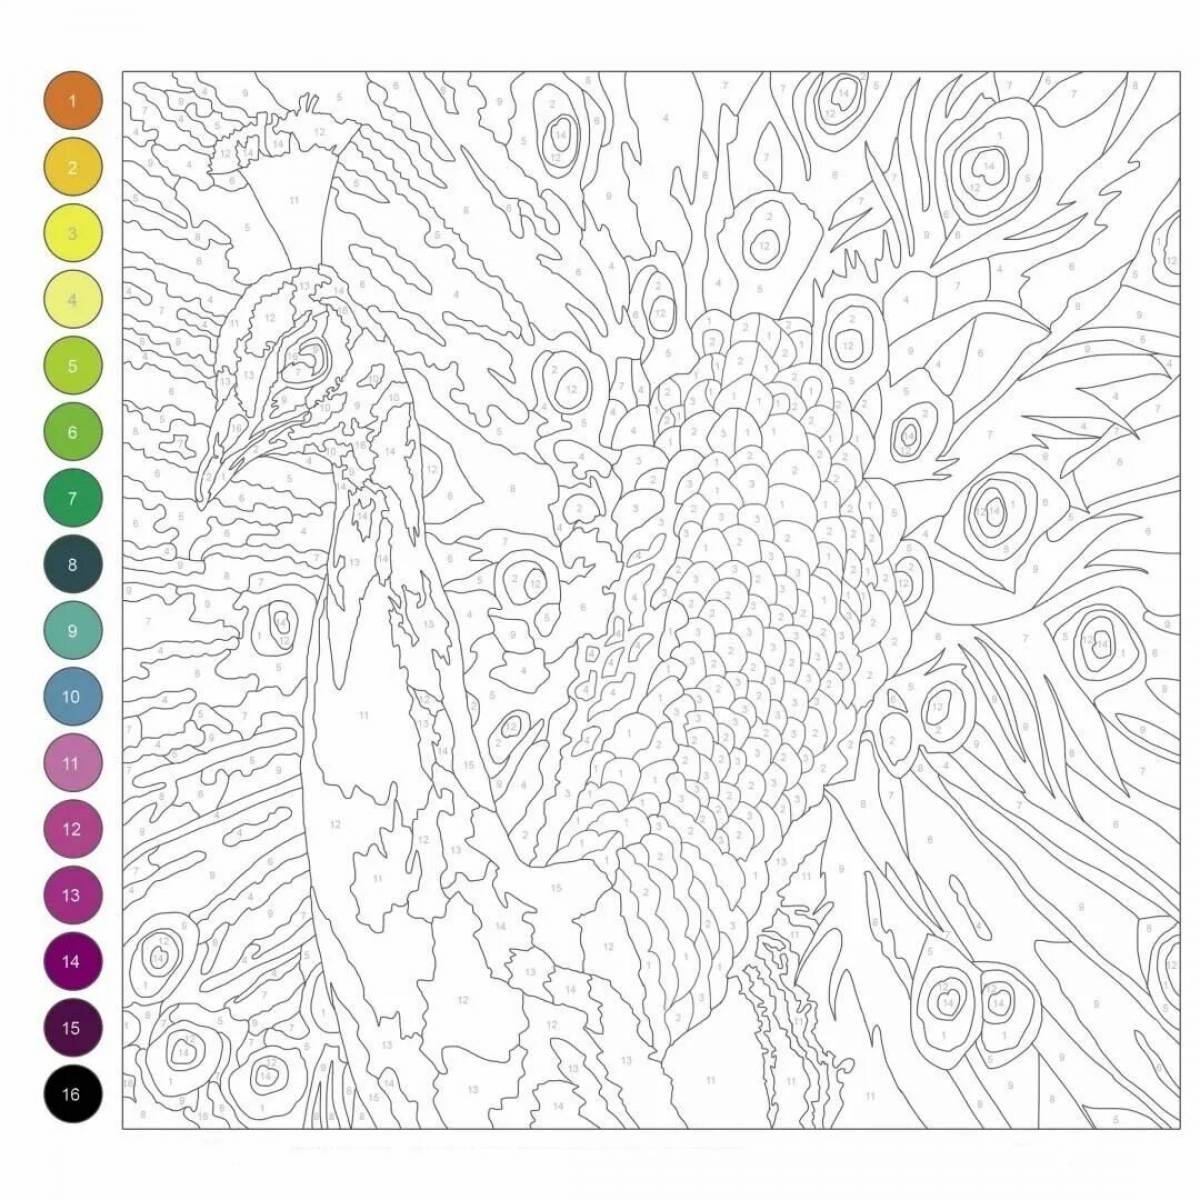 Creative-hard-bright coloring by numbers